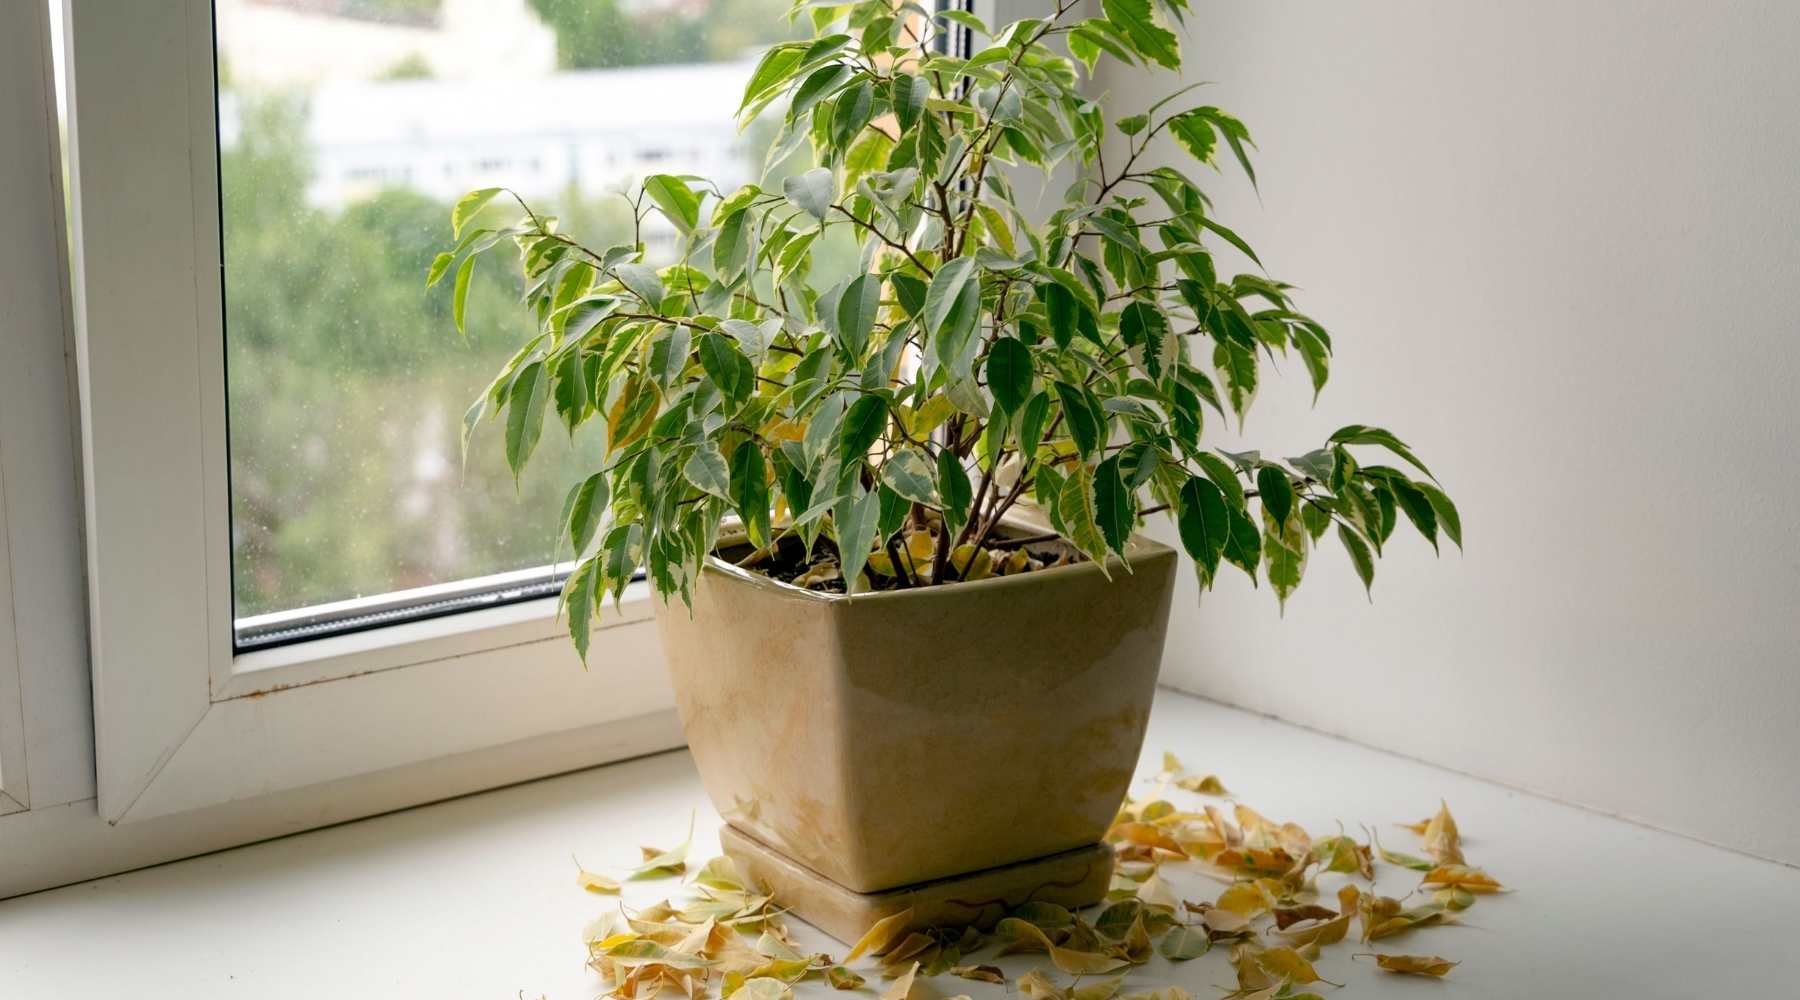 Guide On How To Fertilize Plants For Beginners - plant at the window